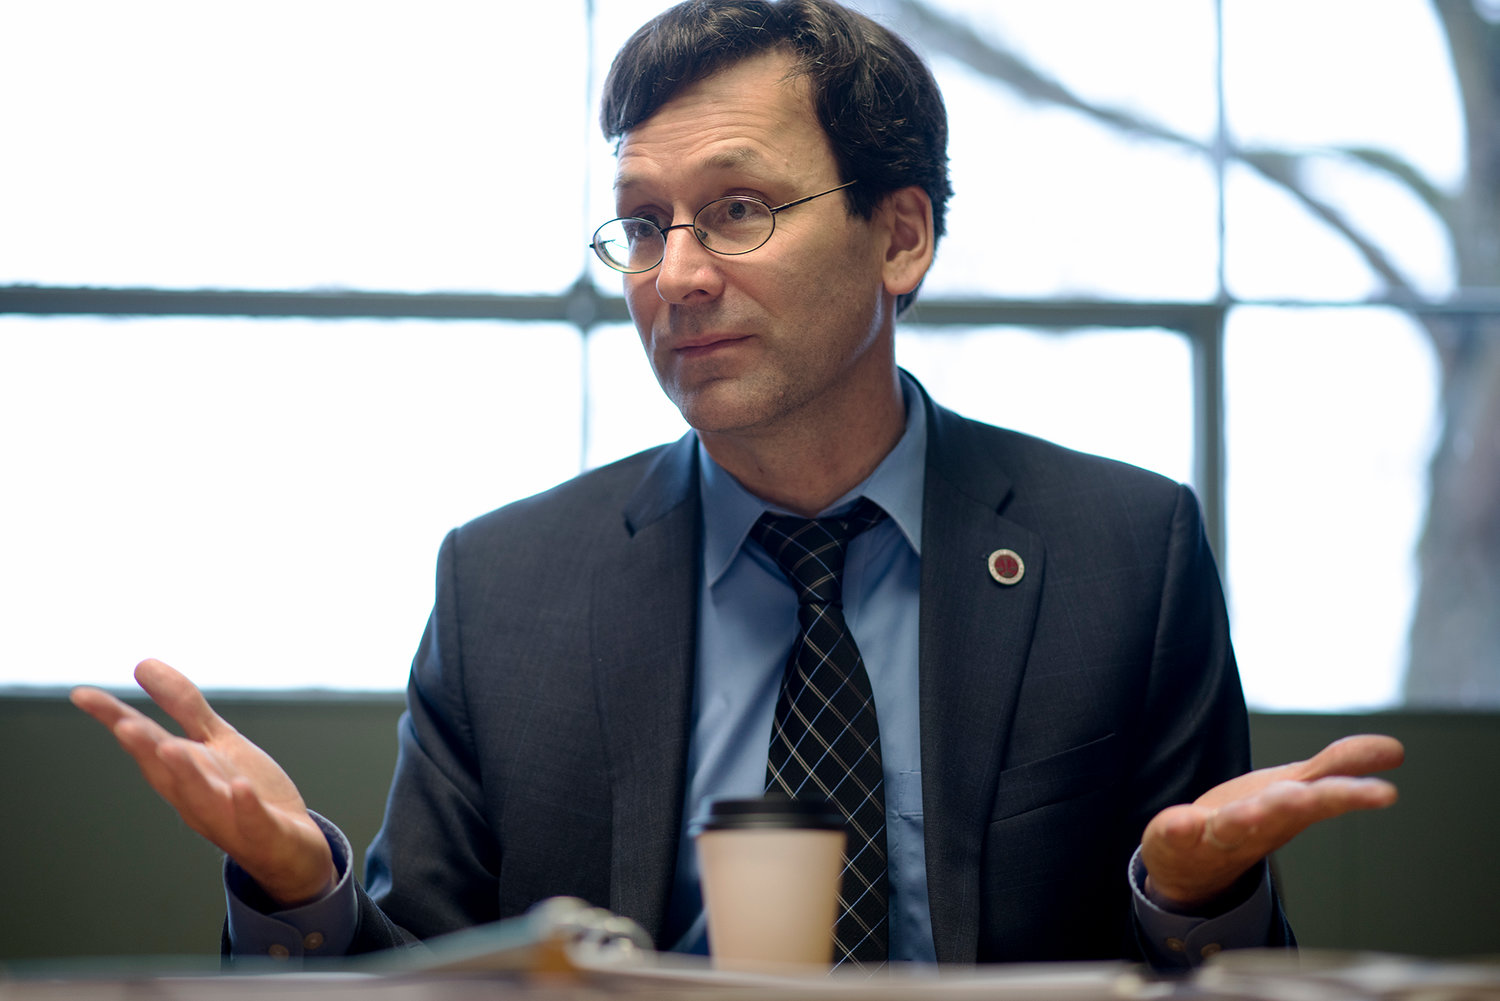 Washington State Attorney General Bob Ferguson is pictured in this file photo.